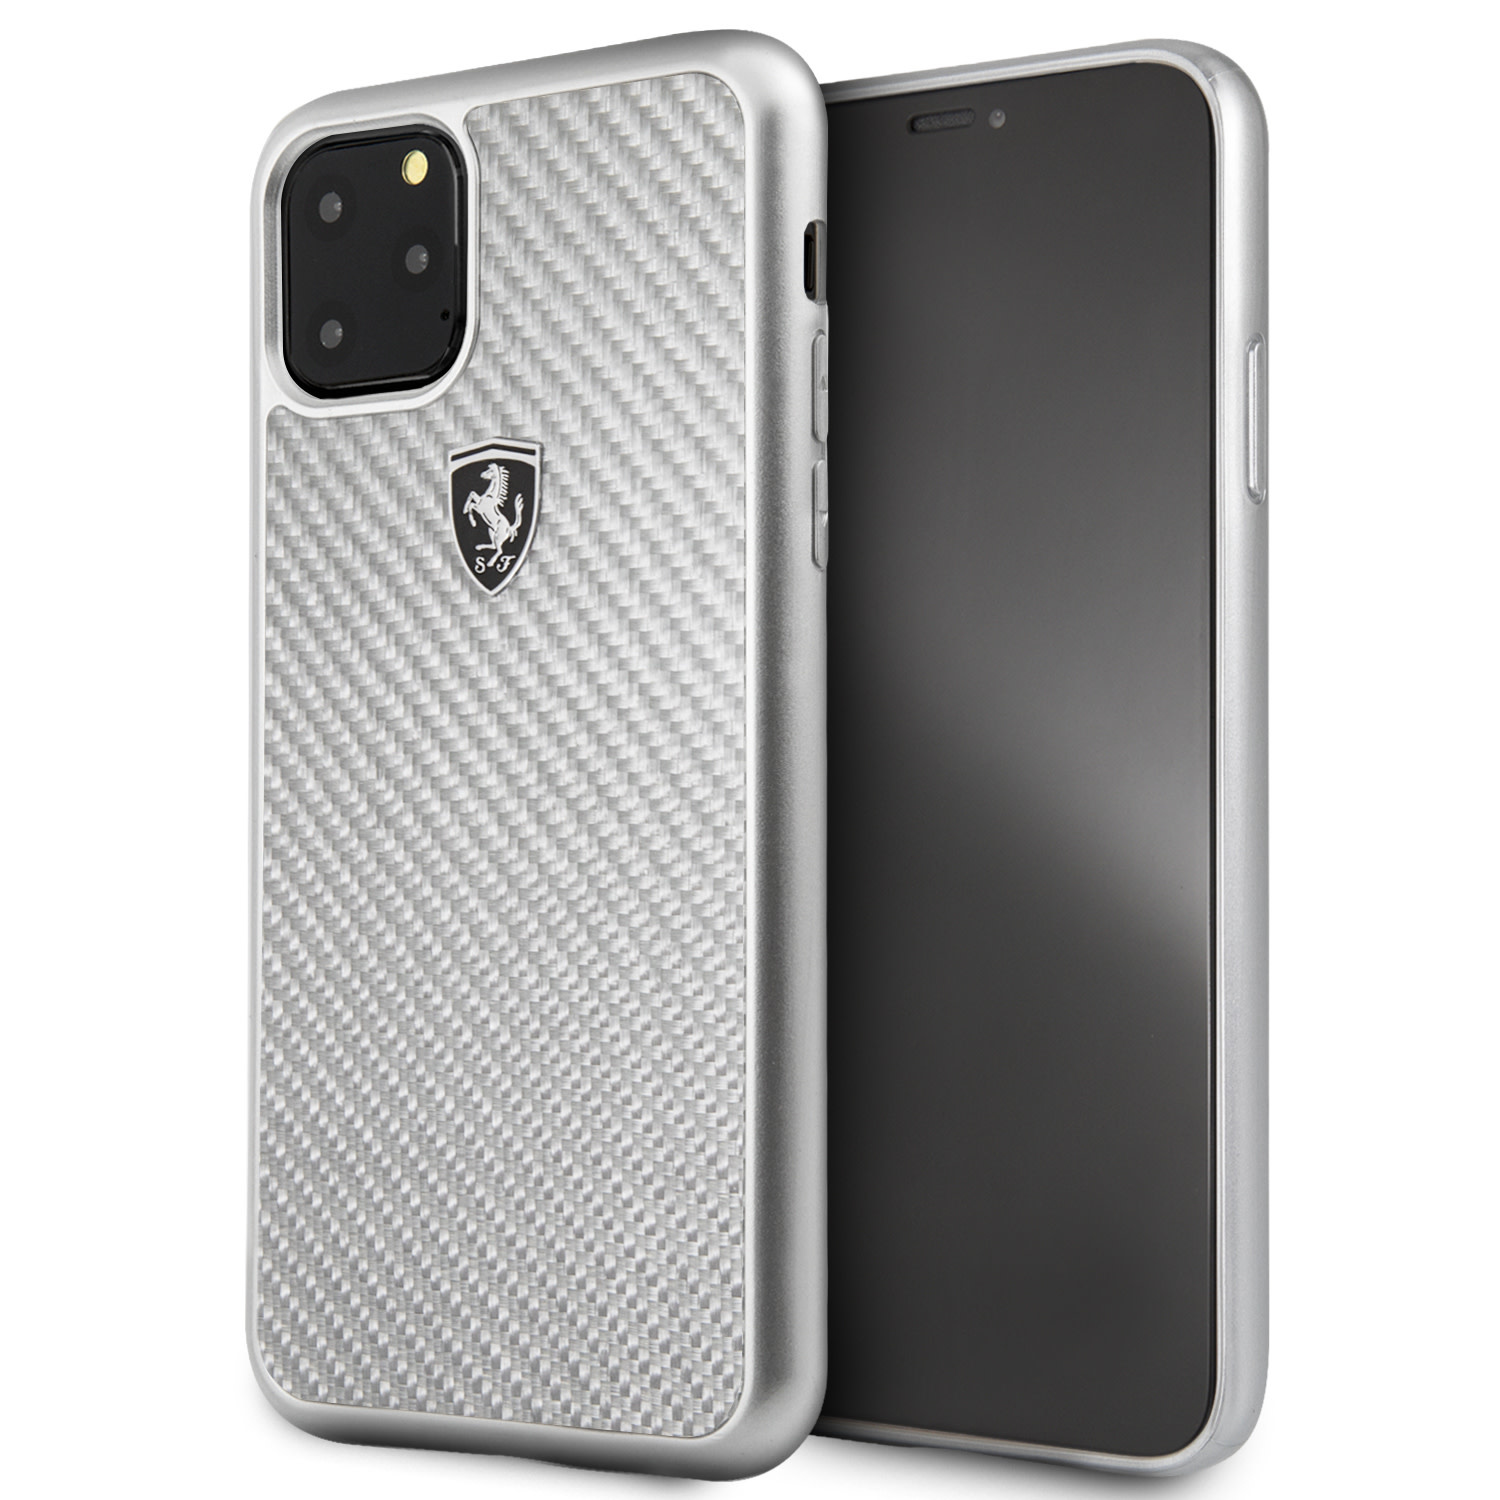 Apple iPhone 11 Pro Max Back cover case Ferrari FEHCAHCN65SI Silver for iPhone 11 Pro Max - Accessoires - The